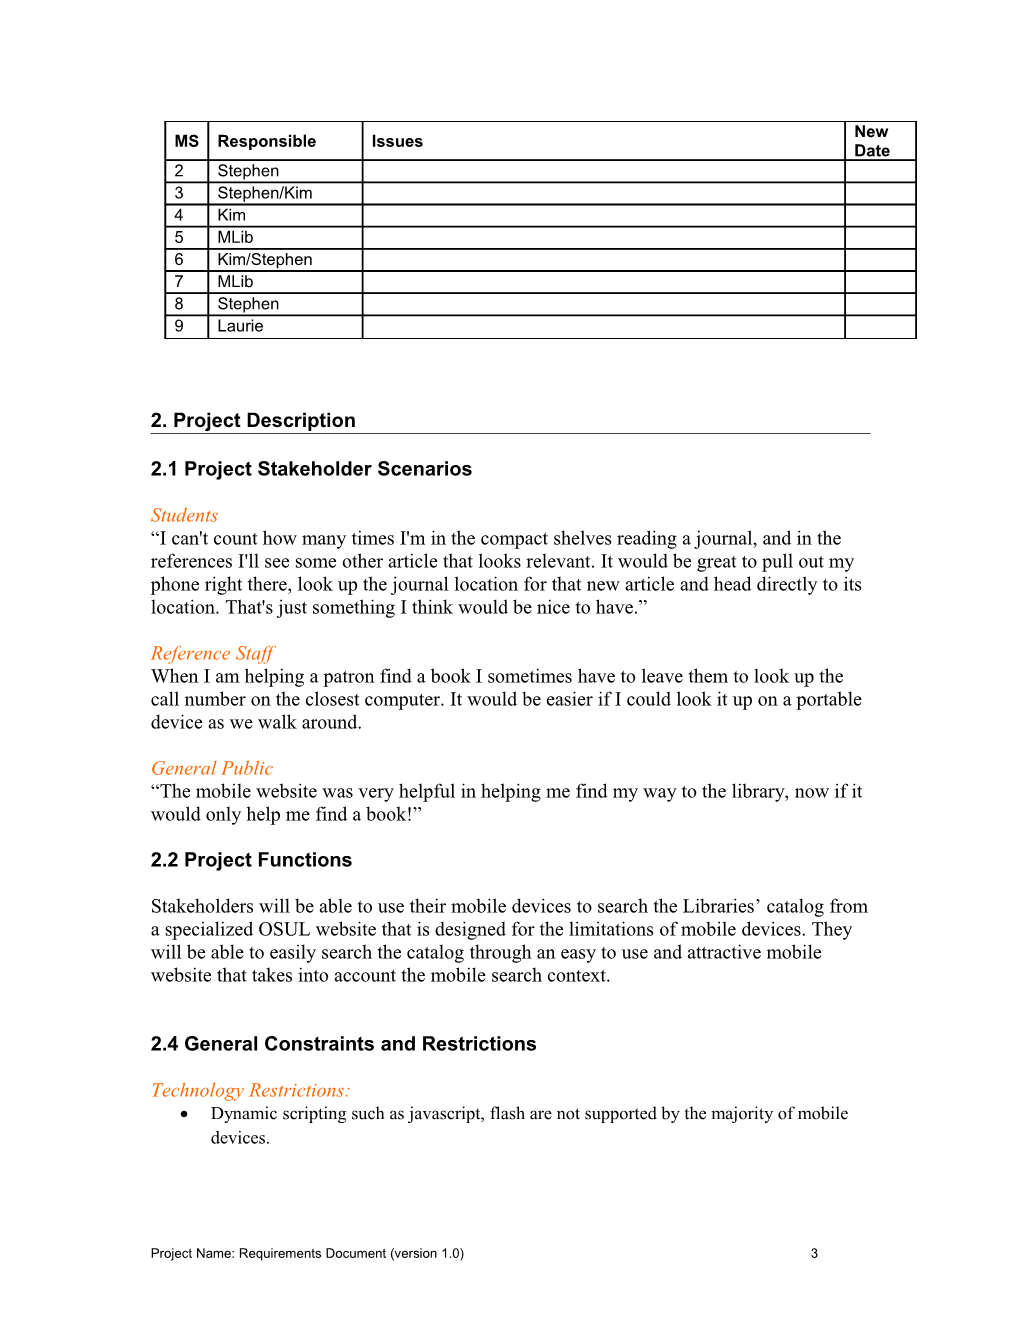 Requirements Document Template